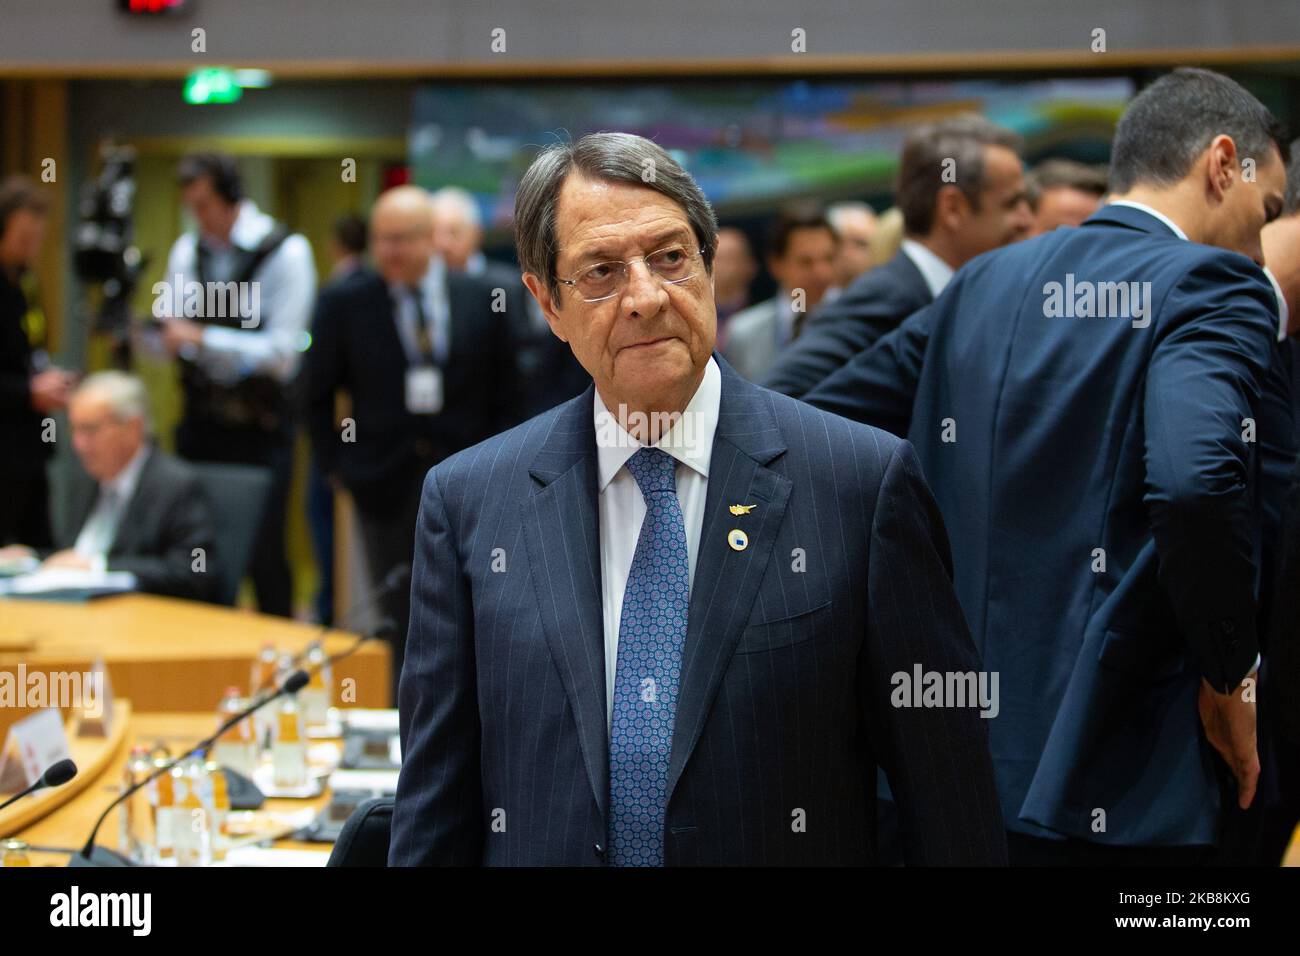 President of the Republic of Cyprus, Nicos Anastasiades. European leaders talk ahead of round table talks at the second day of EU leaders summit without the British PM Boris Johnson on October 18, 2019, in Brussels, Belgium. EU and UK negotiators announced an agreement on the United Kingdom's departure from the European Union, Brexit. (Photo by Nicolas Economou/NurPhoto) Stock Photo